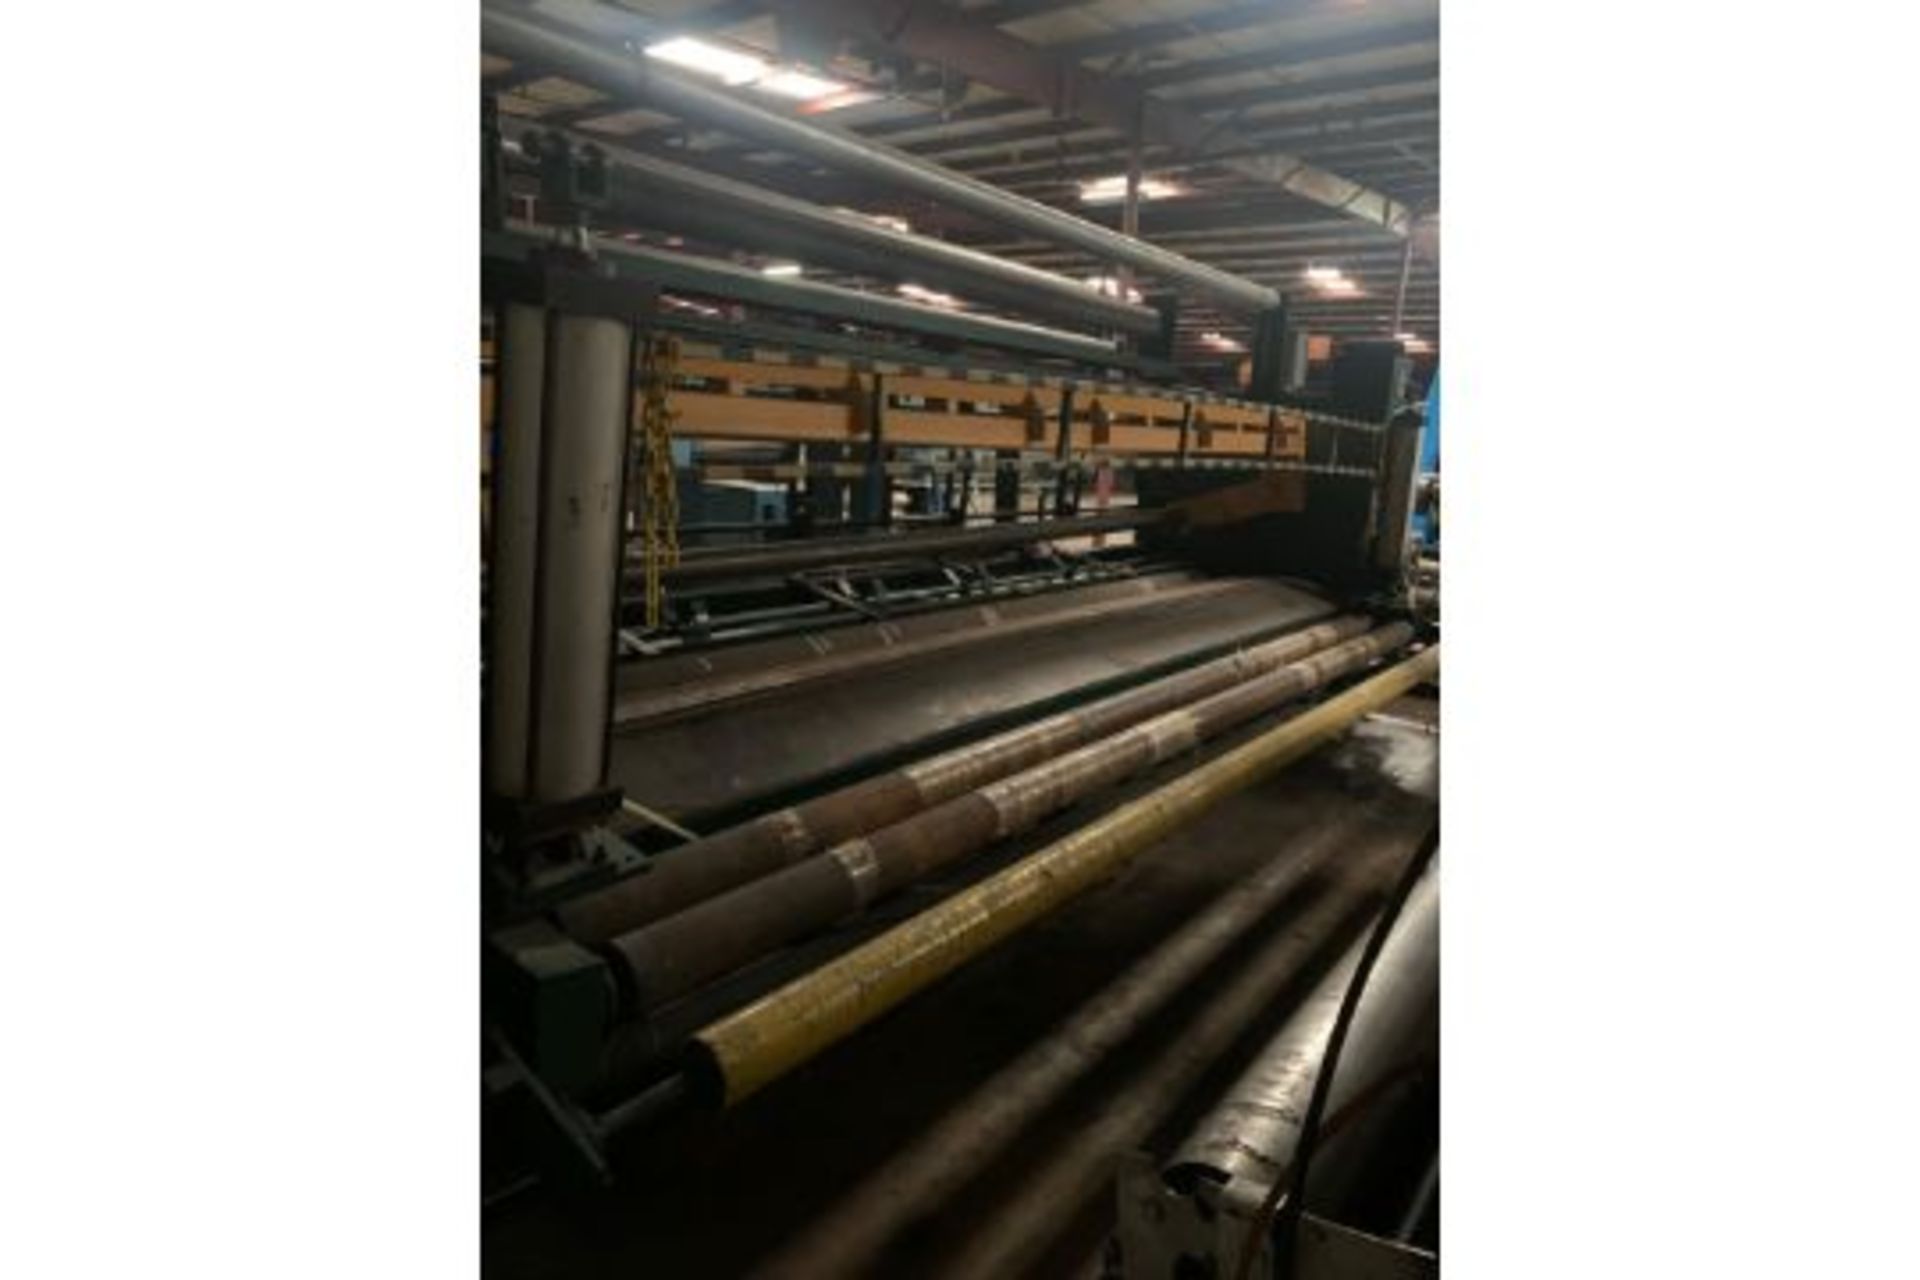 Kranz Automatic Roll Up 154” Model 701MM. Serial S2000 5Hp 220460 Volts, Rigging Fee: $250 - Image 5 of 6